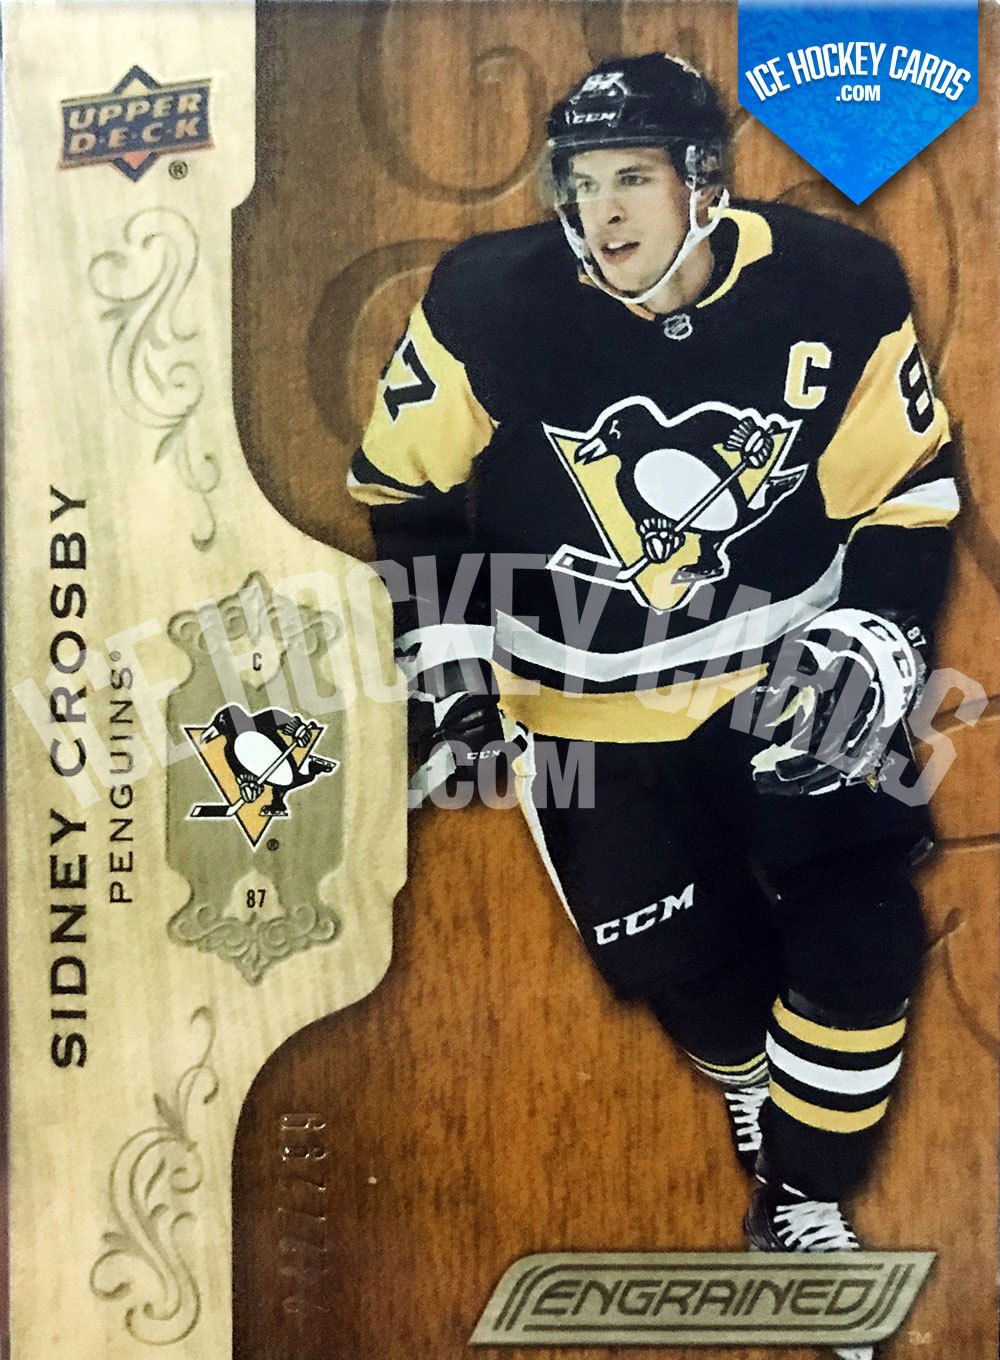 Upper Deck - Engrained 18-19 - Sidney Crosby Base Card up to 299